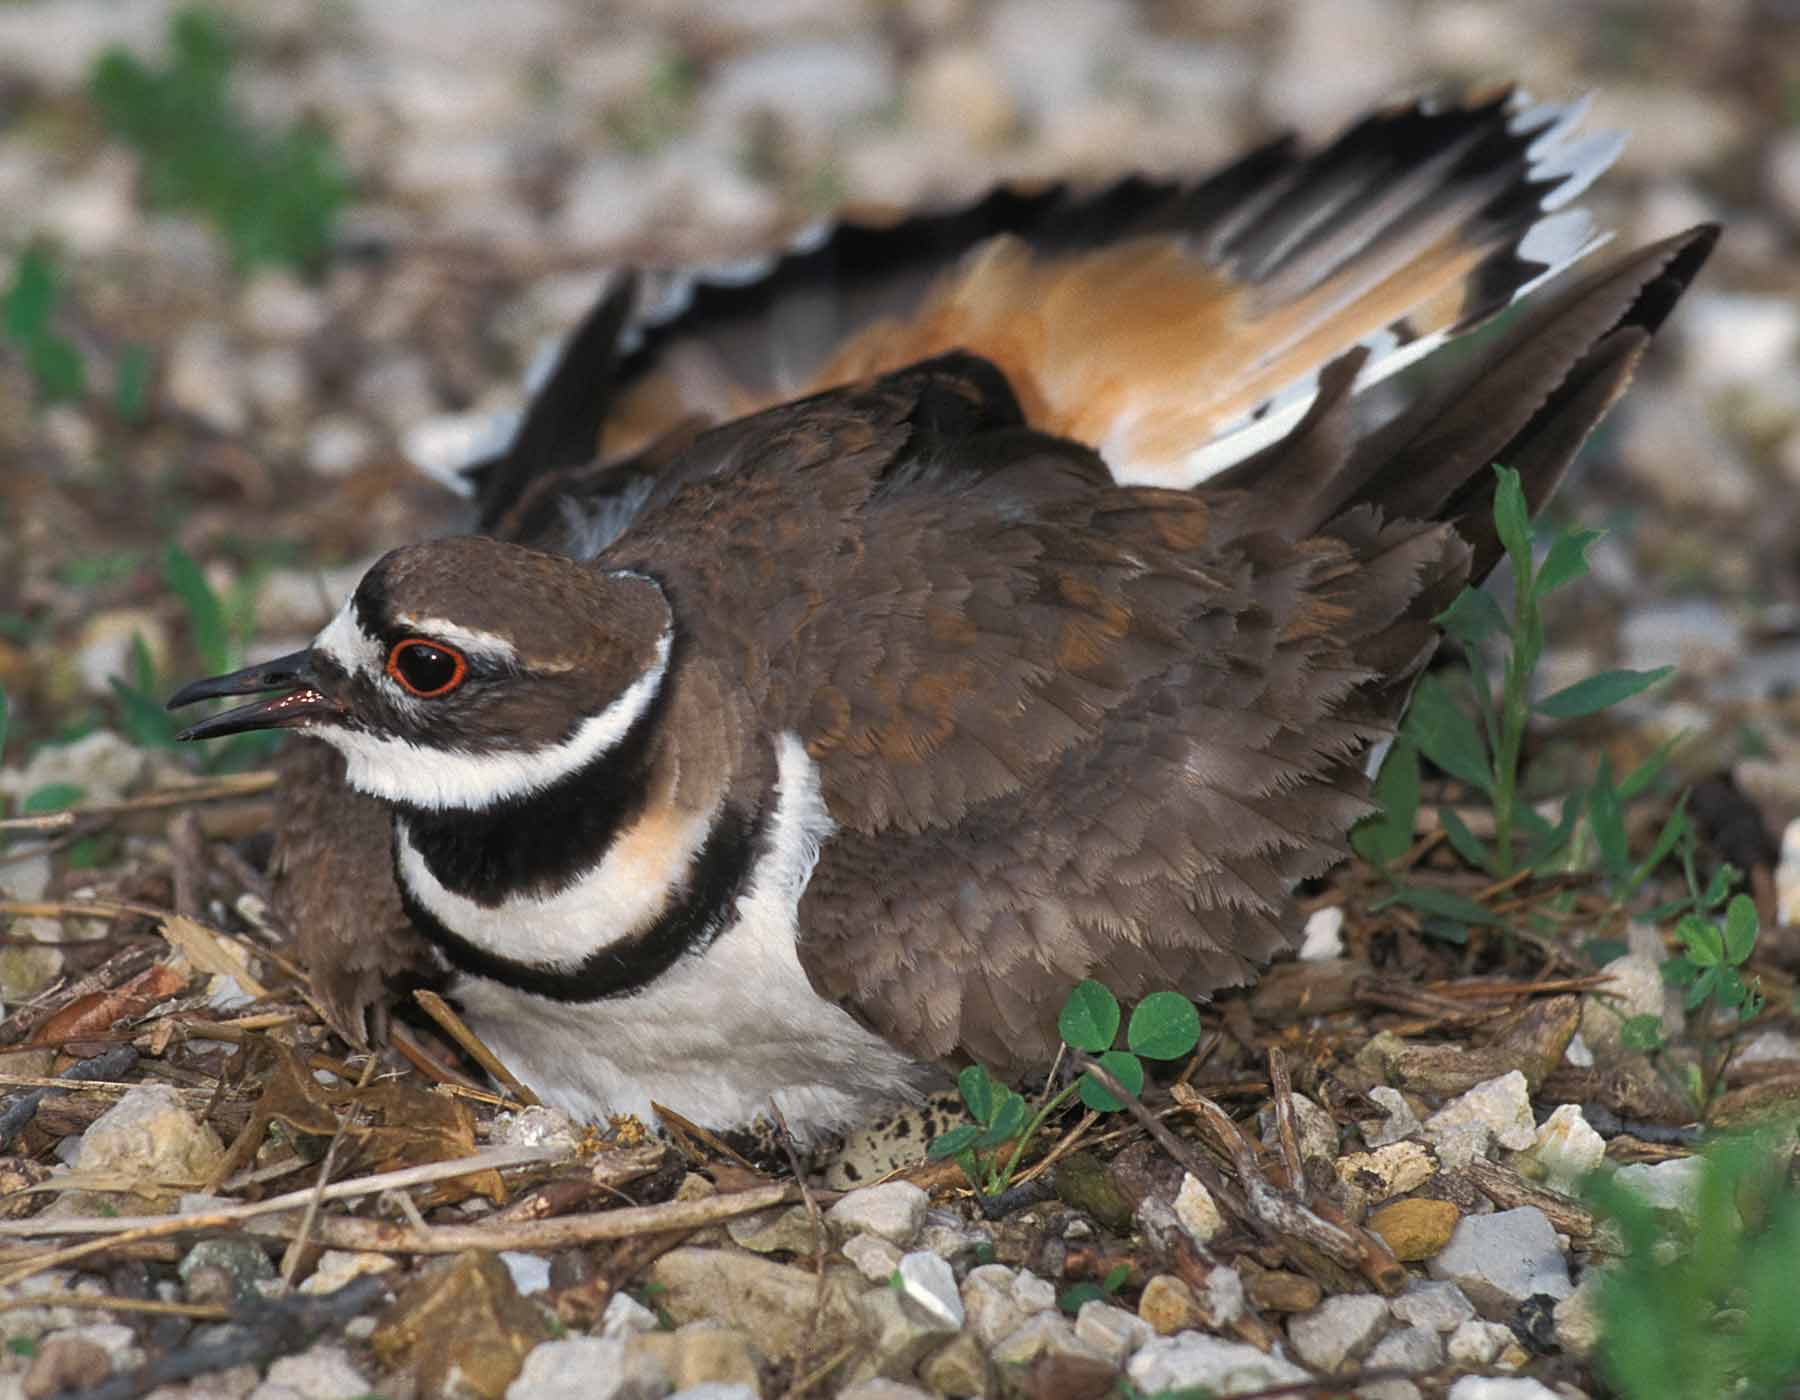 Photo of a killdeer on its nest, beginning distraction display.